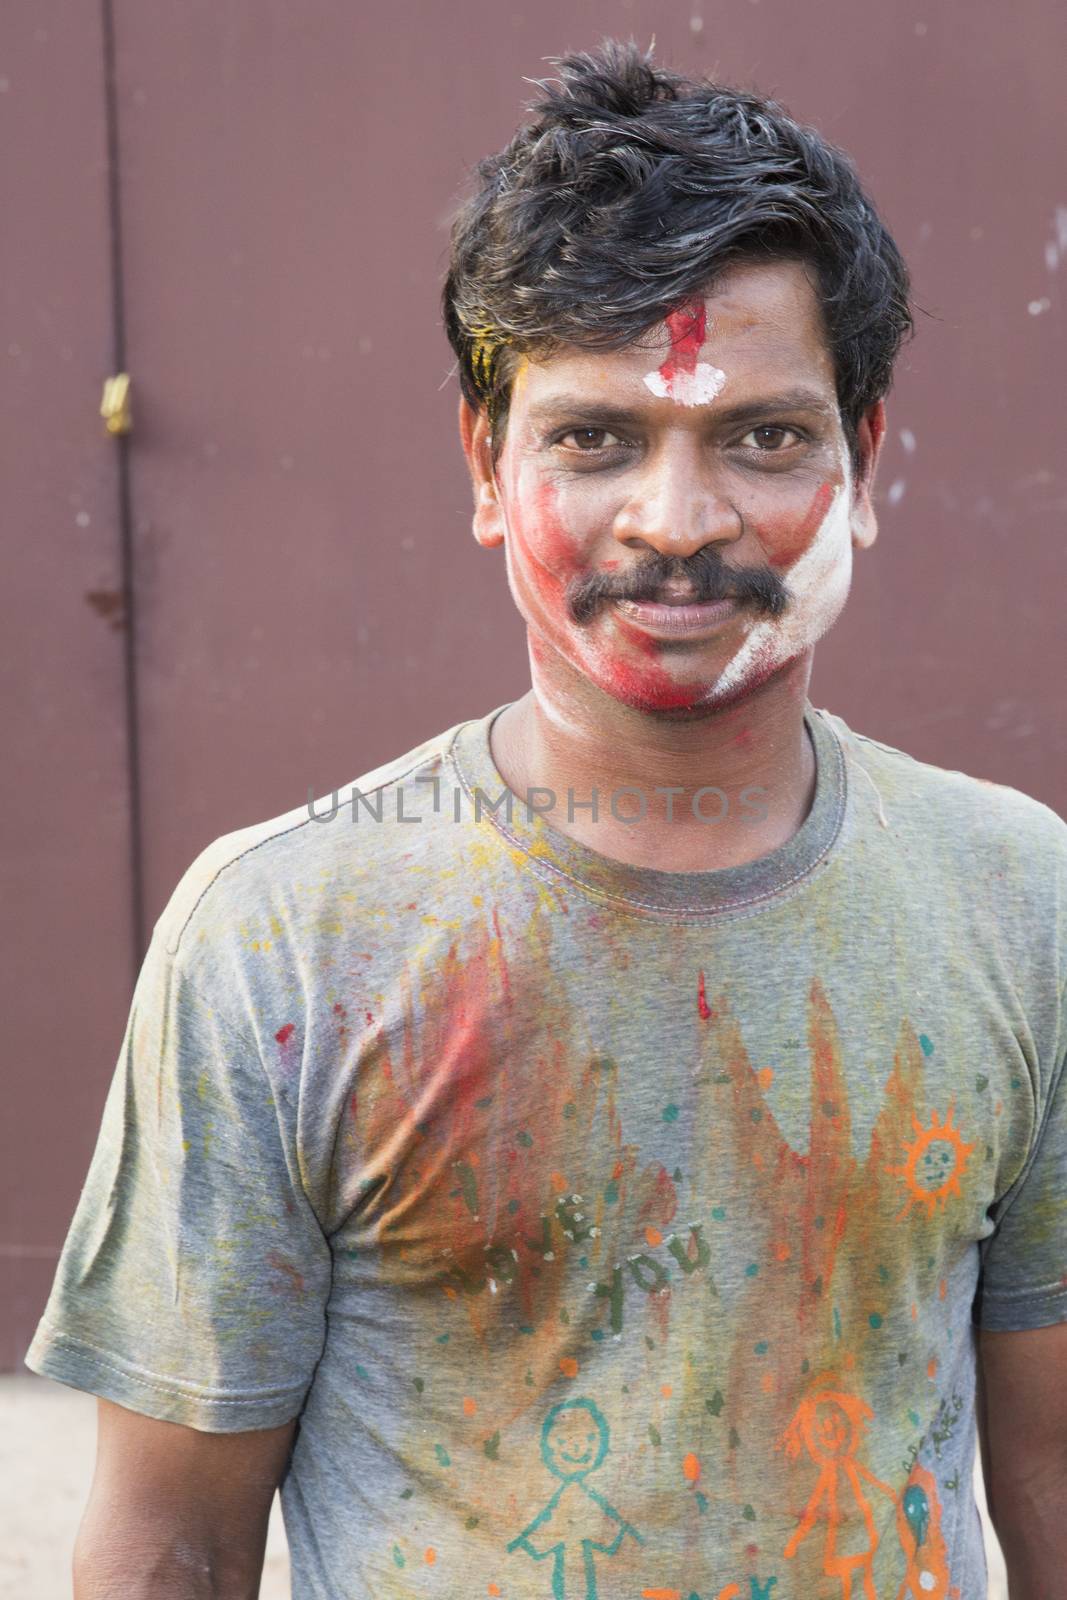 Pondicherry, Tamil Nadu,India - May 15, 2014 : each year in villages, people celebrate the temple fest, for the full day. They walk in groups, they launch paint on people, play music.